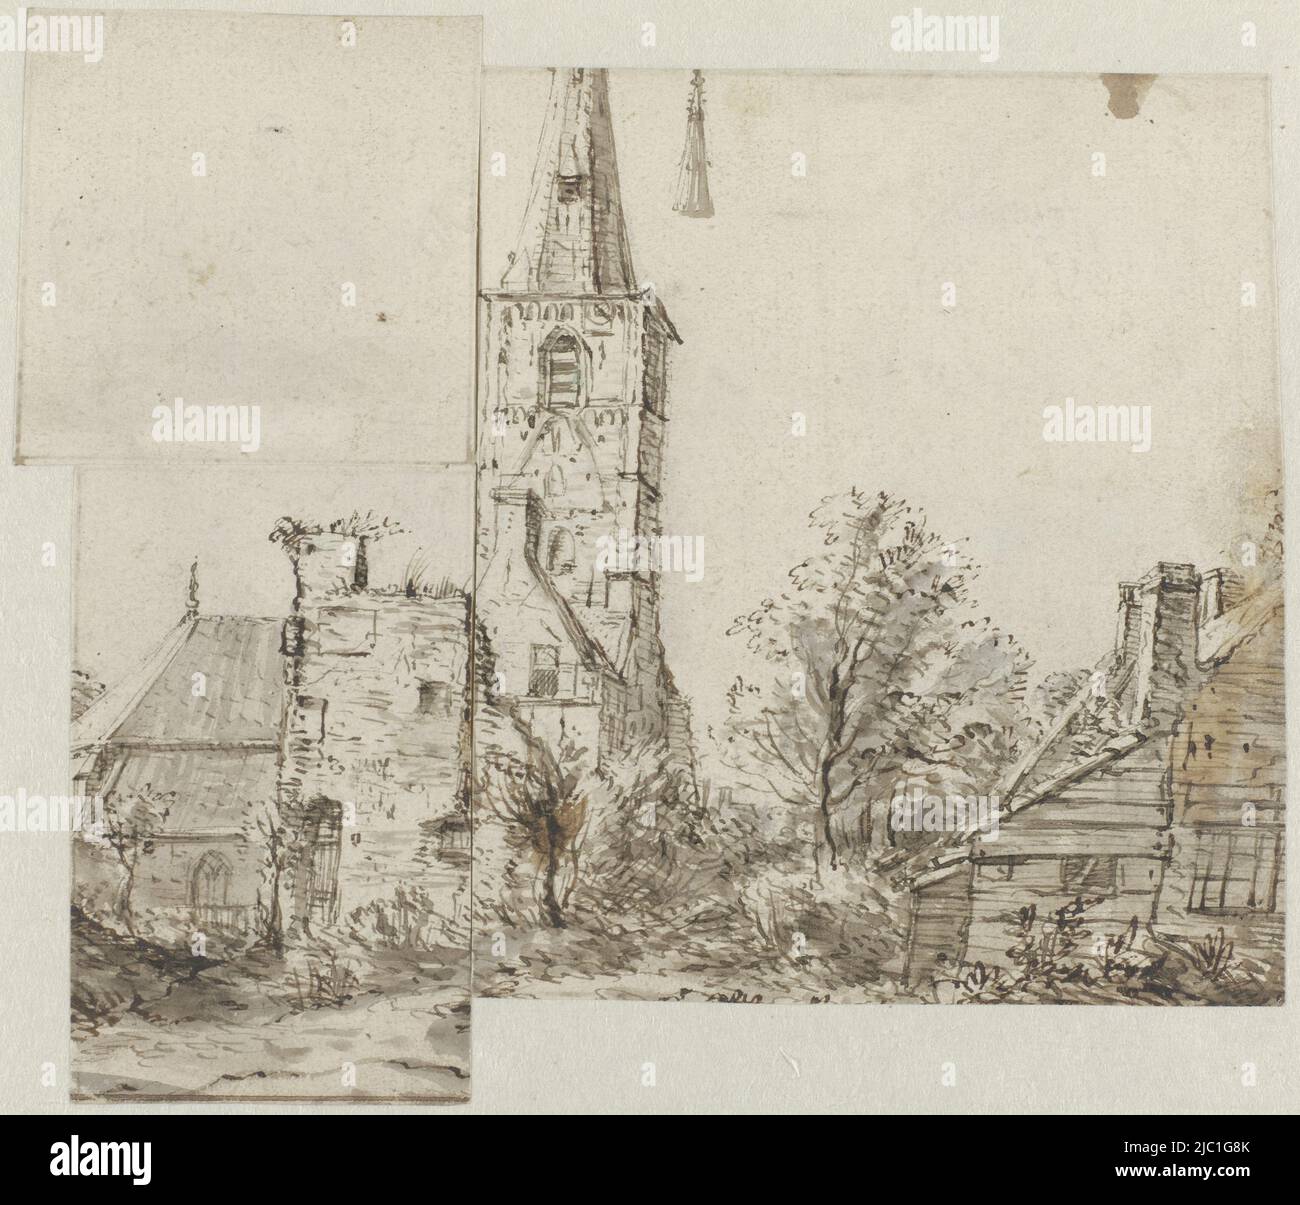 The drawing is cut into three pieces, View of the church tower near Rijnsburg., draughtsman: Isaac van Ostade, Netherlands, 1631 - 1649, paper, pen, h 190 mm × w 217 mm Stock Photo